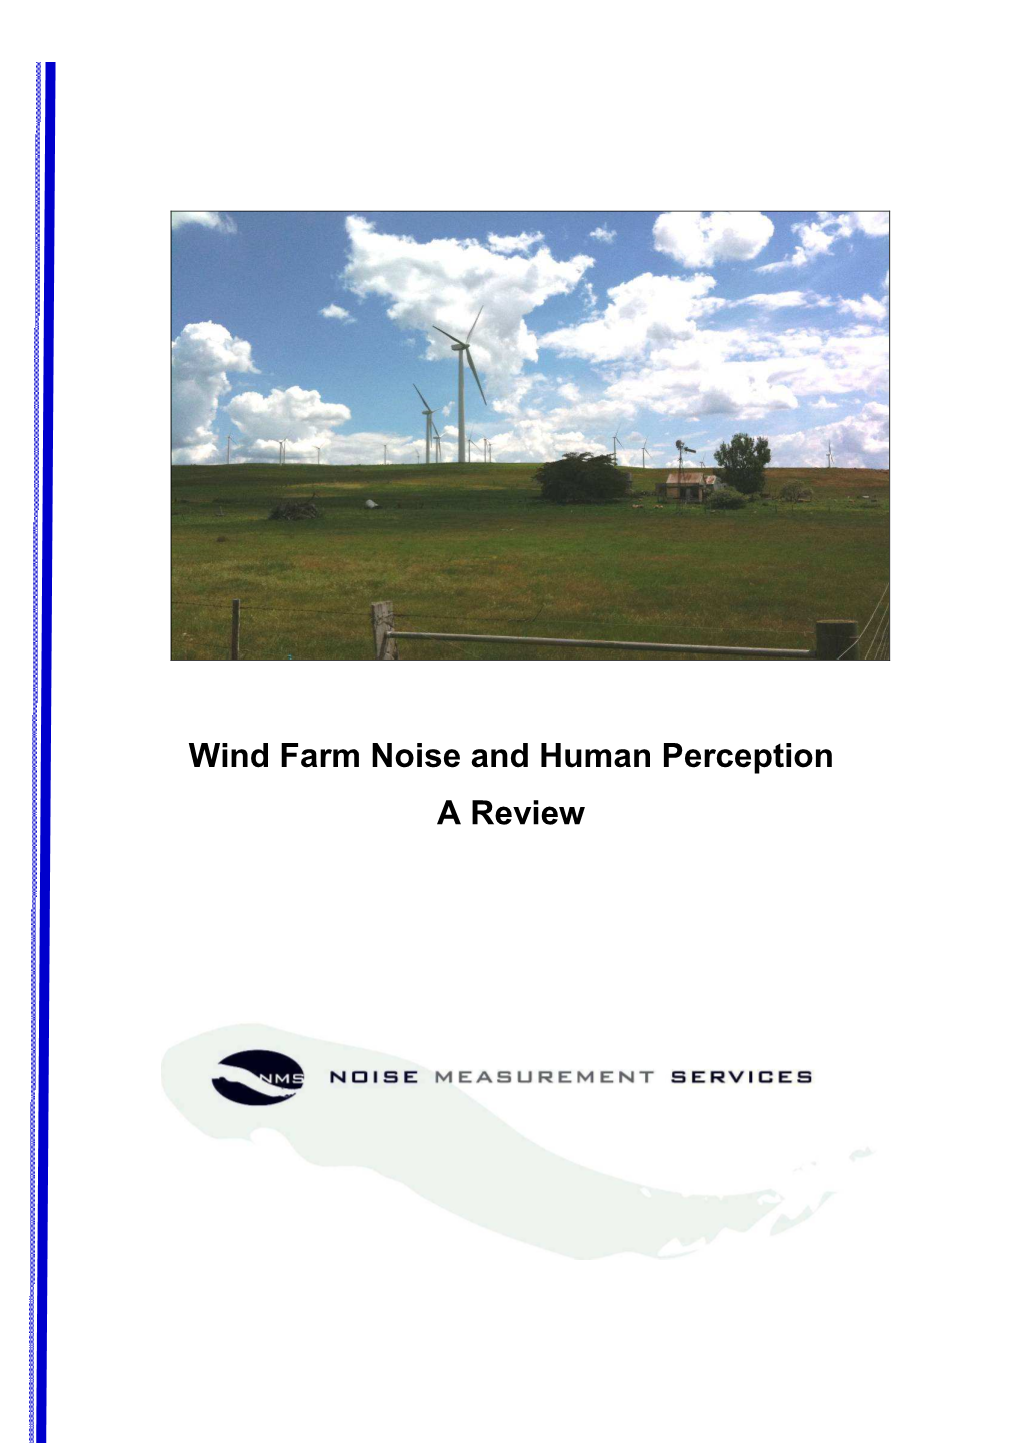 Wind Farm Noise and Human Perception a Review